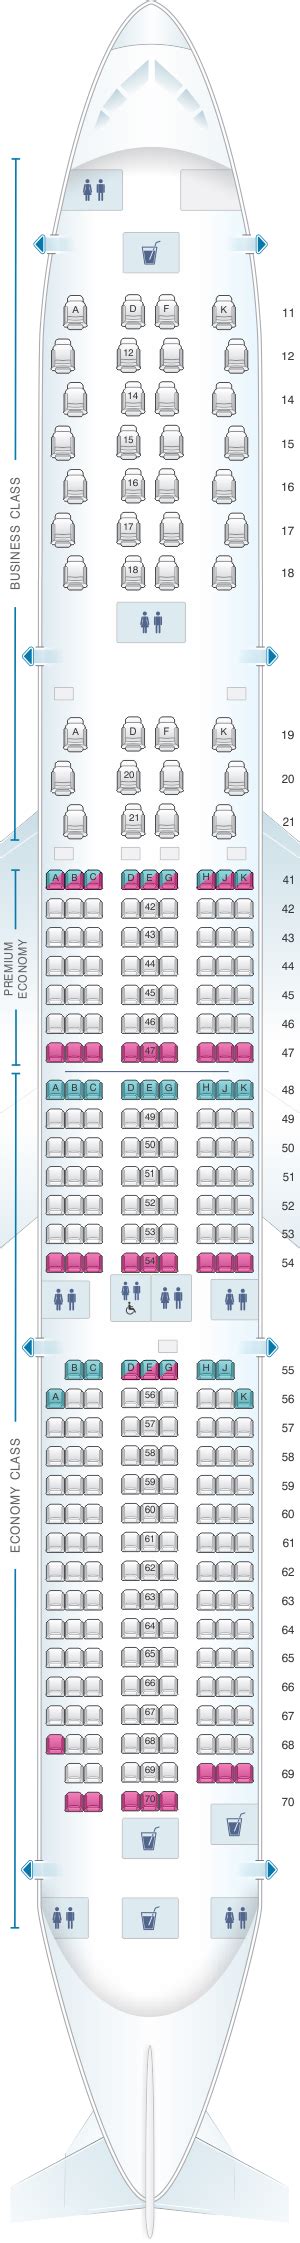 Singapore airlines a350 business class seat. Seat Map Singapore Airlines Airbus A350 900 config.2 ...